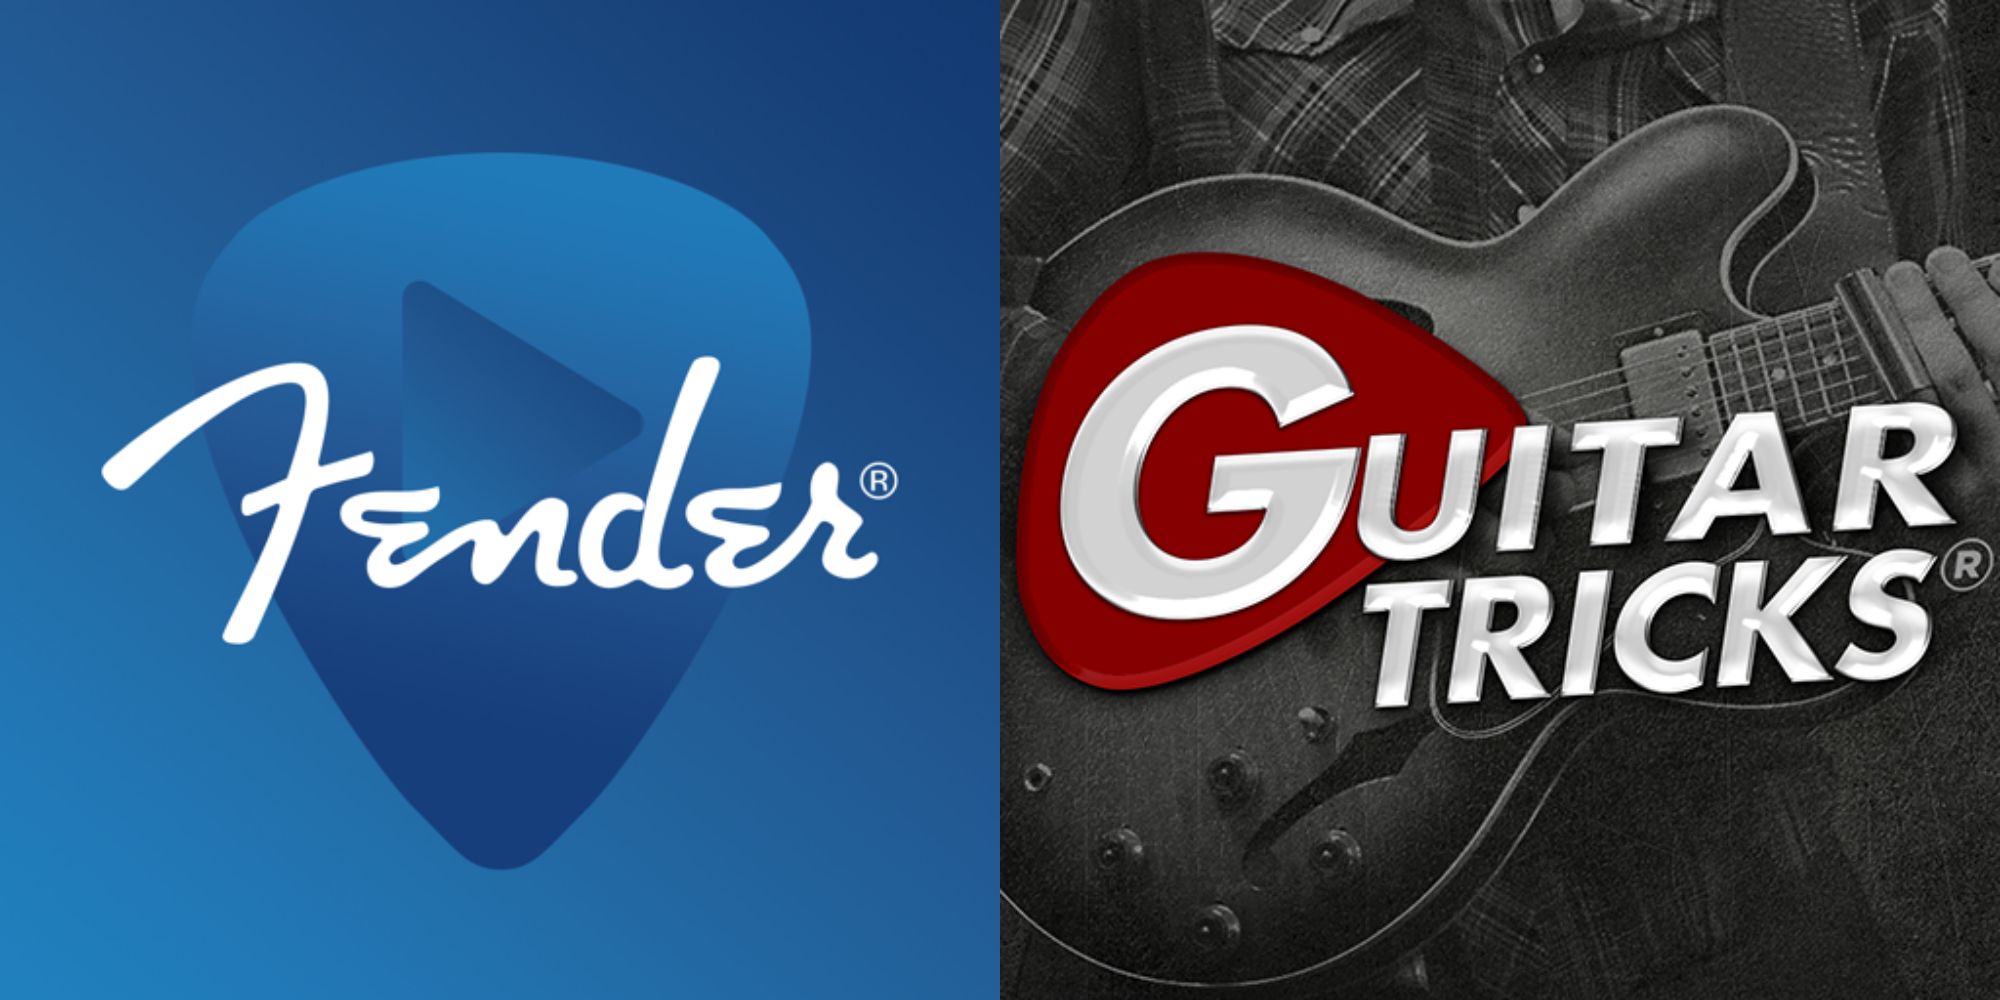 Split image showinf the logos for the Fender and Guitar Tricks Apps.